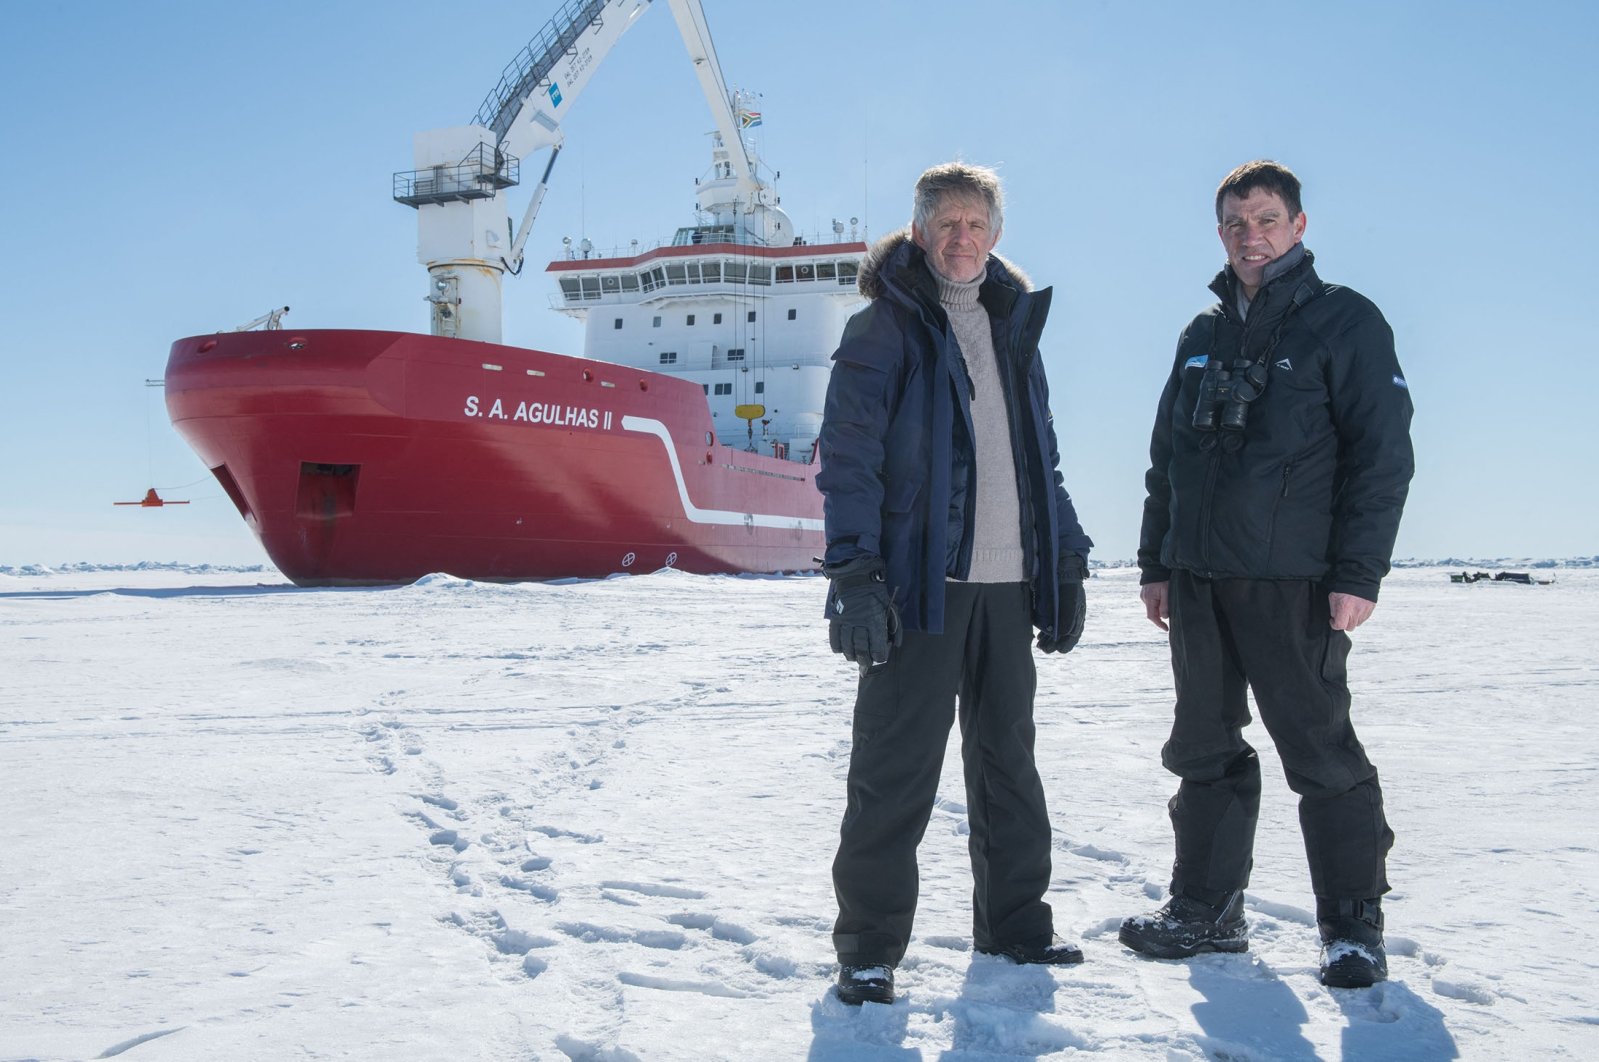 Menson Bound, director of exploration of the Endurance22 expedition (L) and John Shears, expedition leader, with SA Agulhas II in the background, on the Weddell Sea, Antarctica, Feb. 20, 2022. (Falklands Maritime Heritage Trust via AFP)